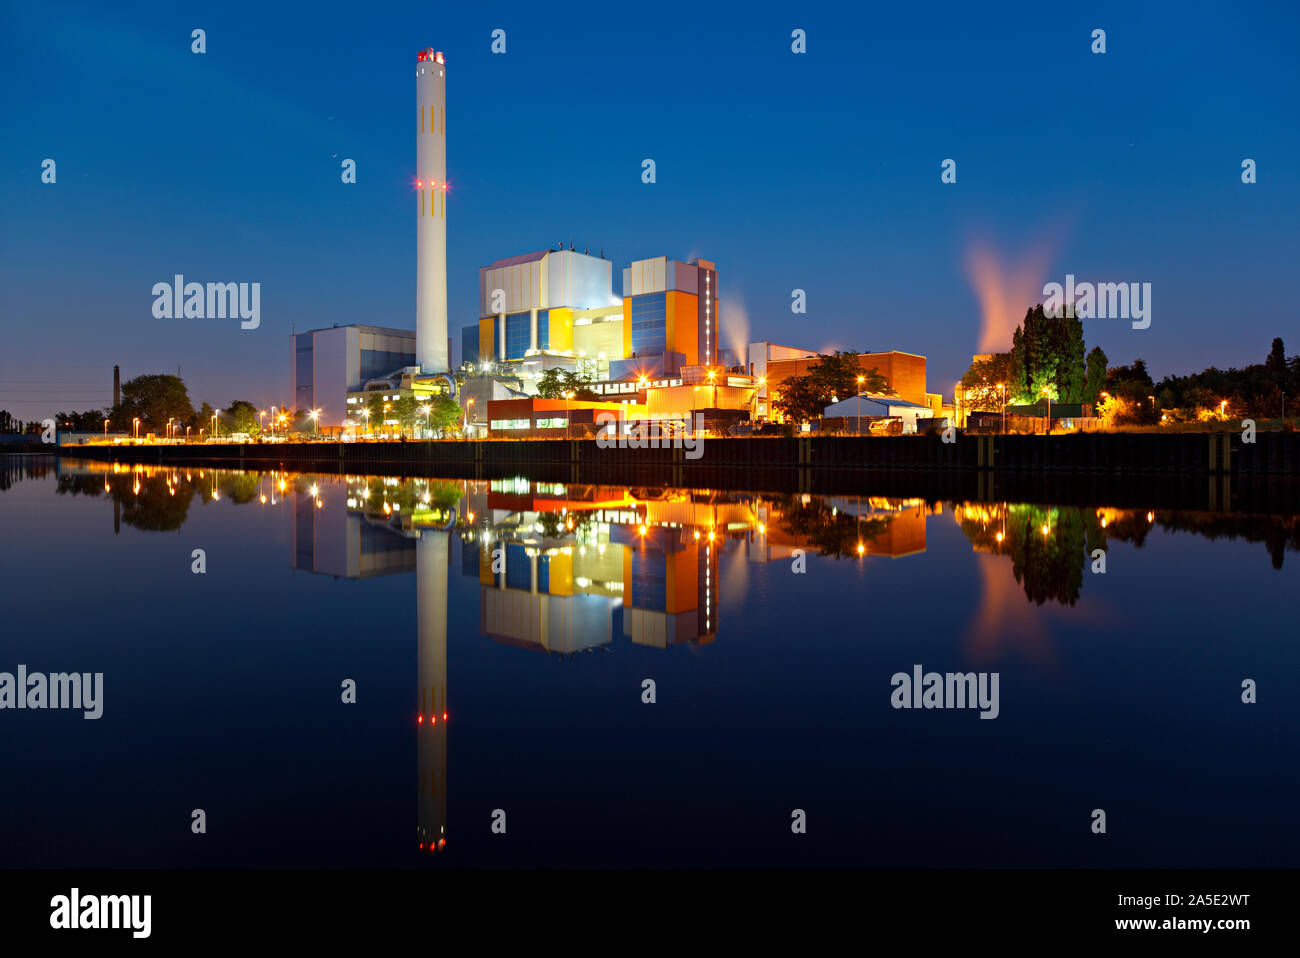 An incineration plant at a canal at blue hour in the night. Strong colors and very clear reflection. Stock Photo